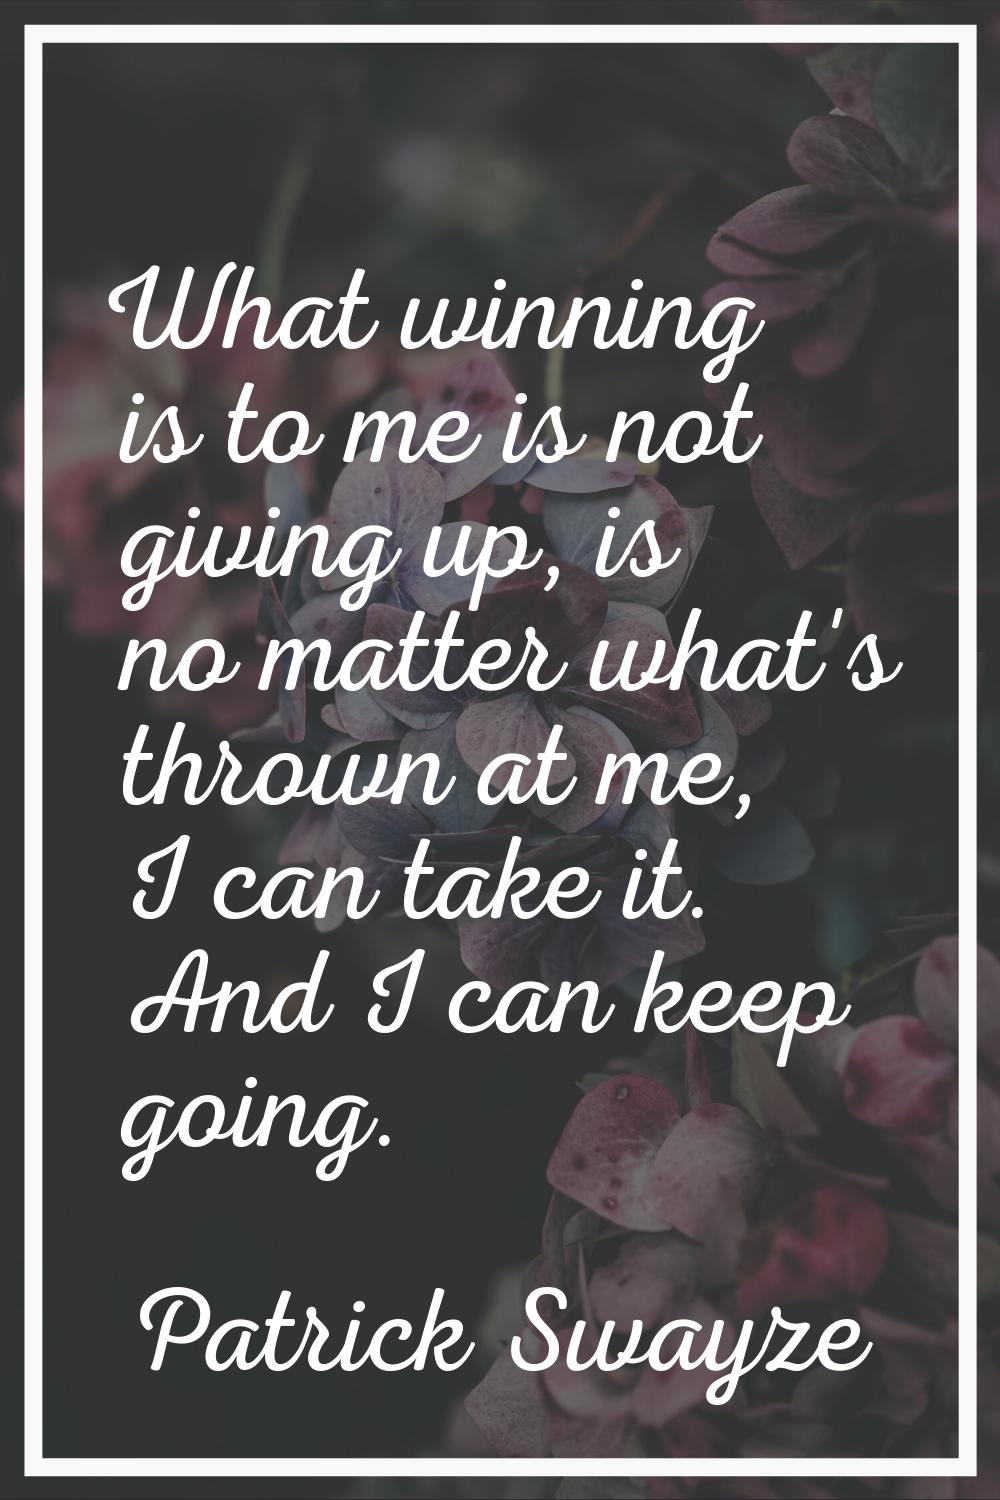 What winning is to me is not giving up, is no matter what's thrown at me, I can take it. And I can 